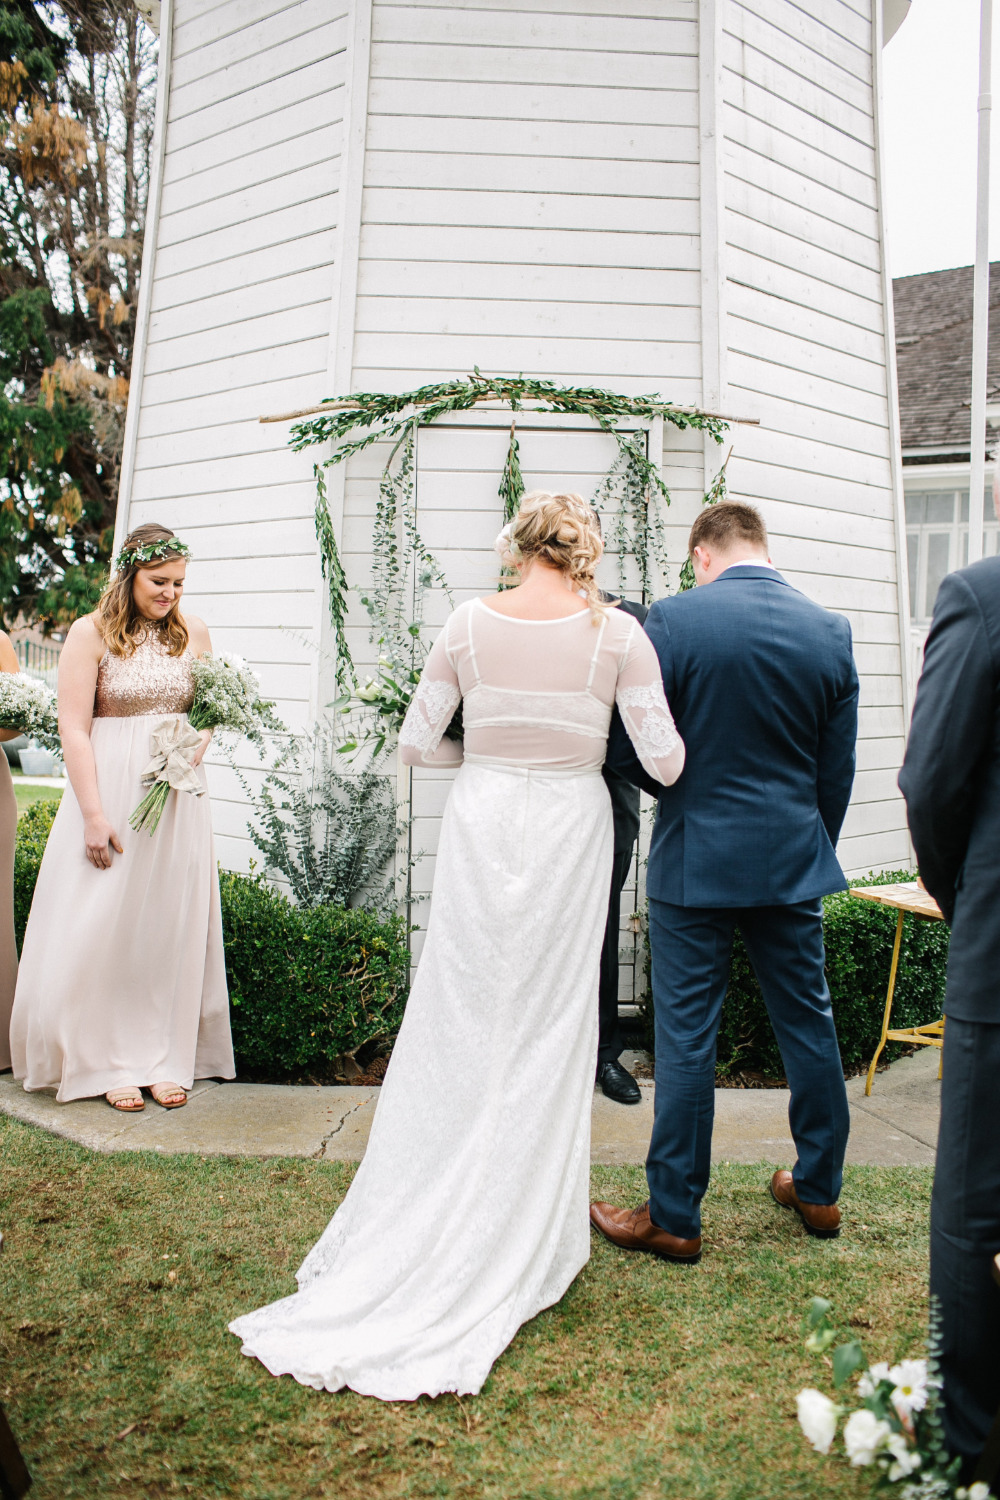 sweet and simple outdoor wedding ceremony